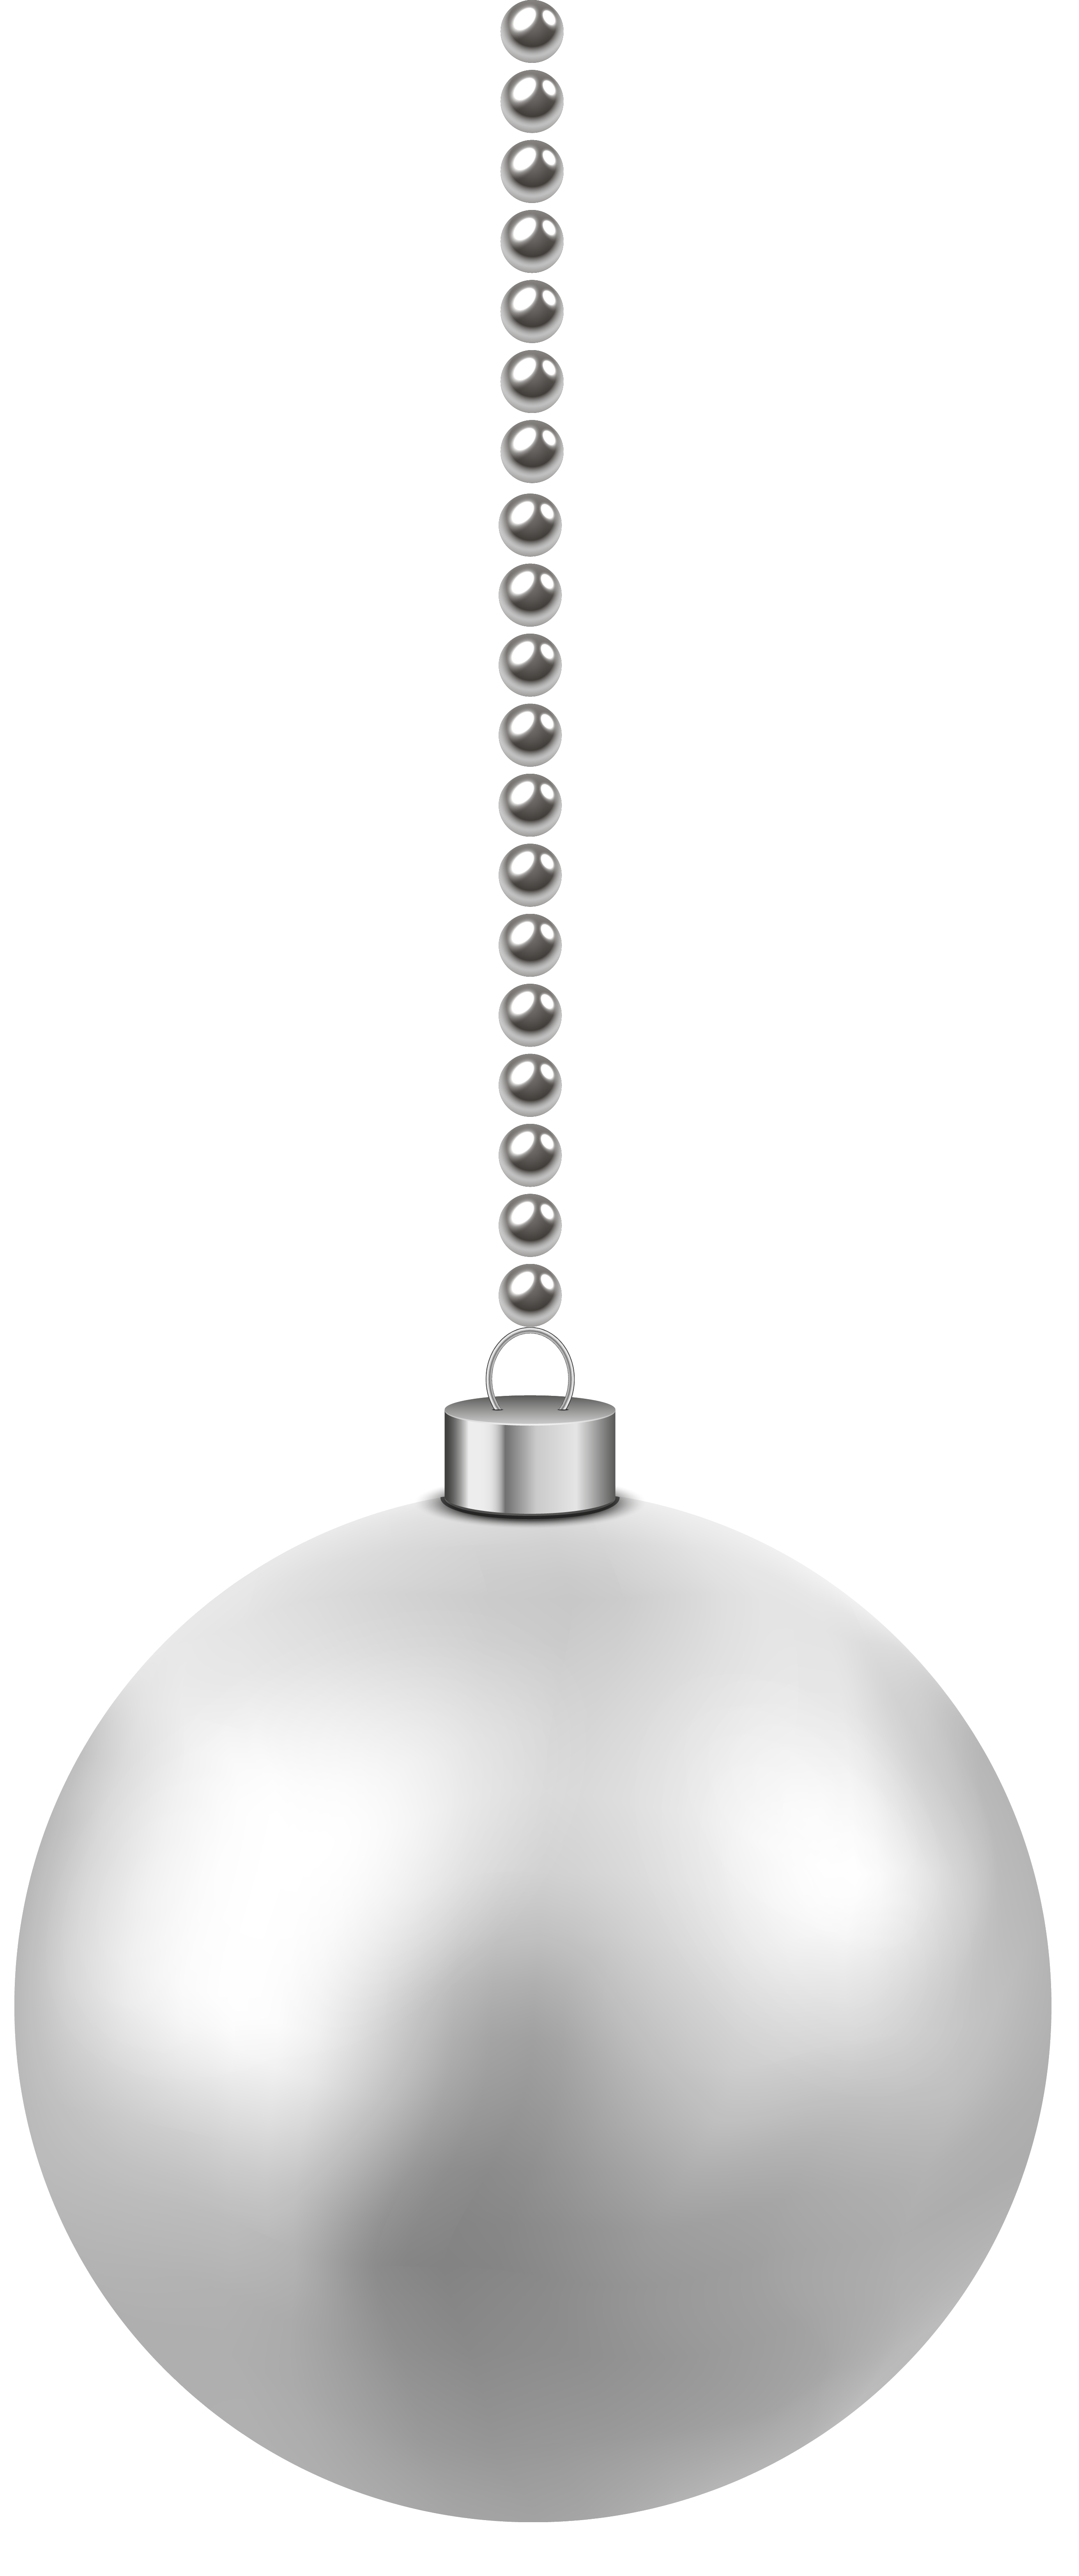 Lamp clipart light ball. White christmas hanging png